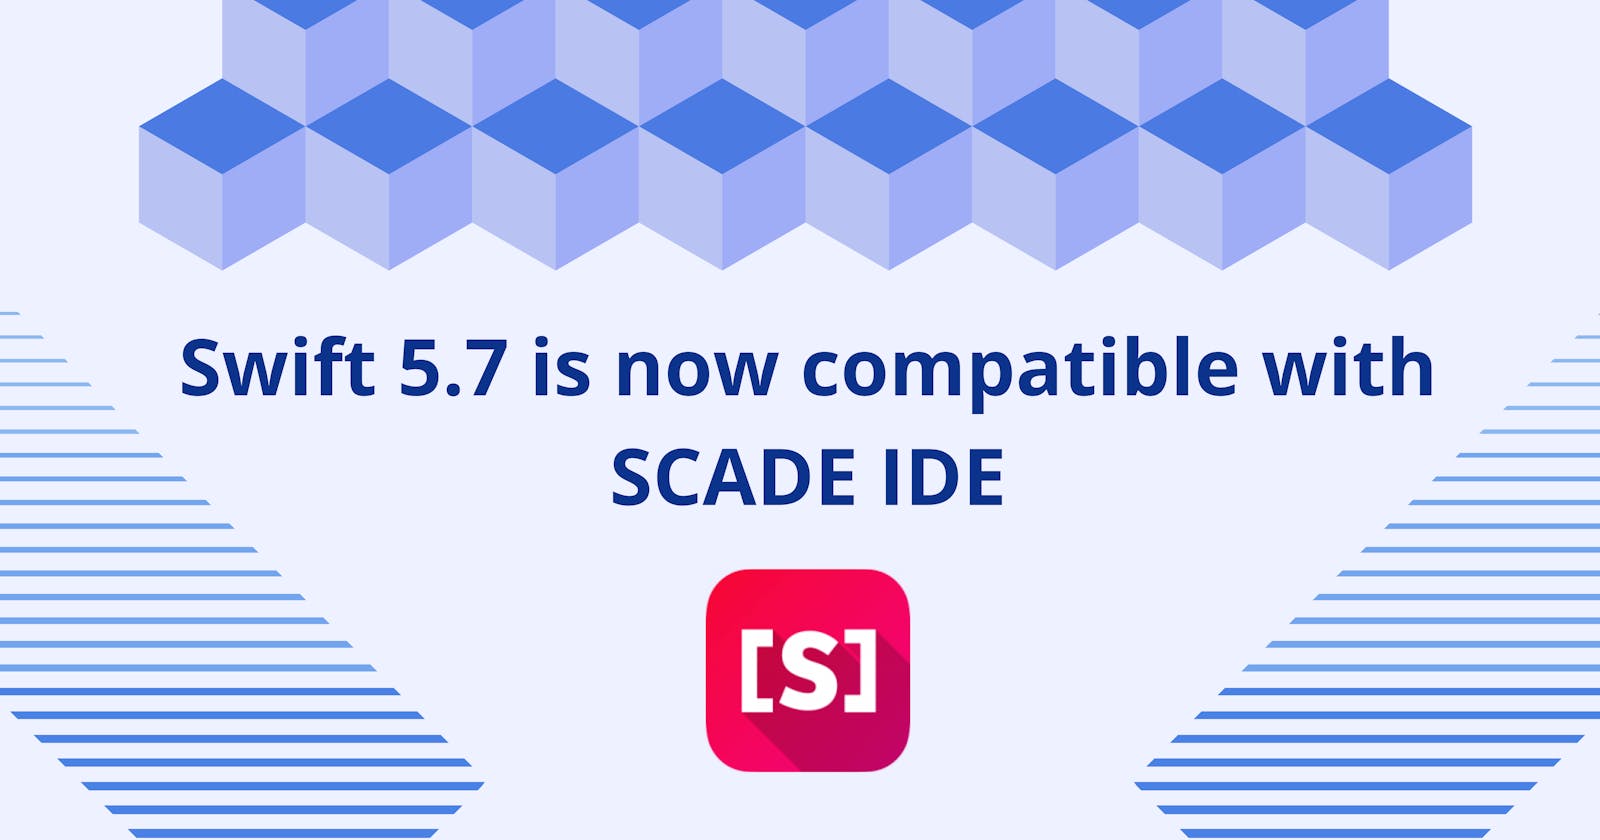 Announcement: Swift 5.7 is now compatible with SCADE IDE